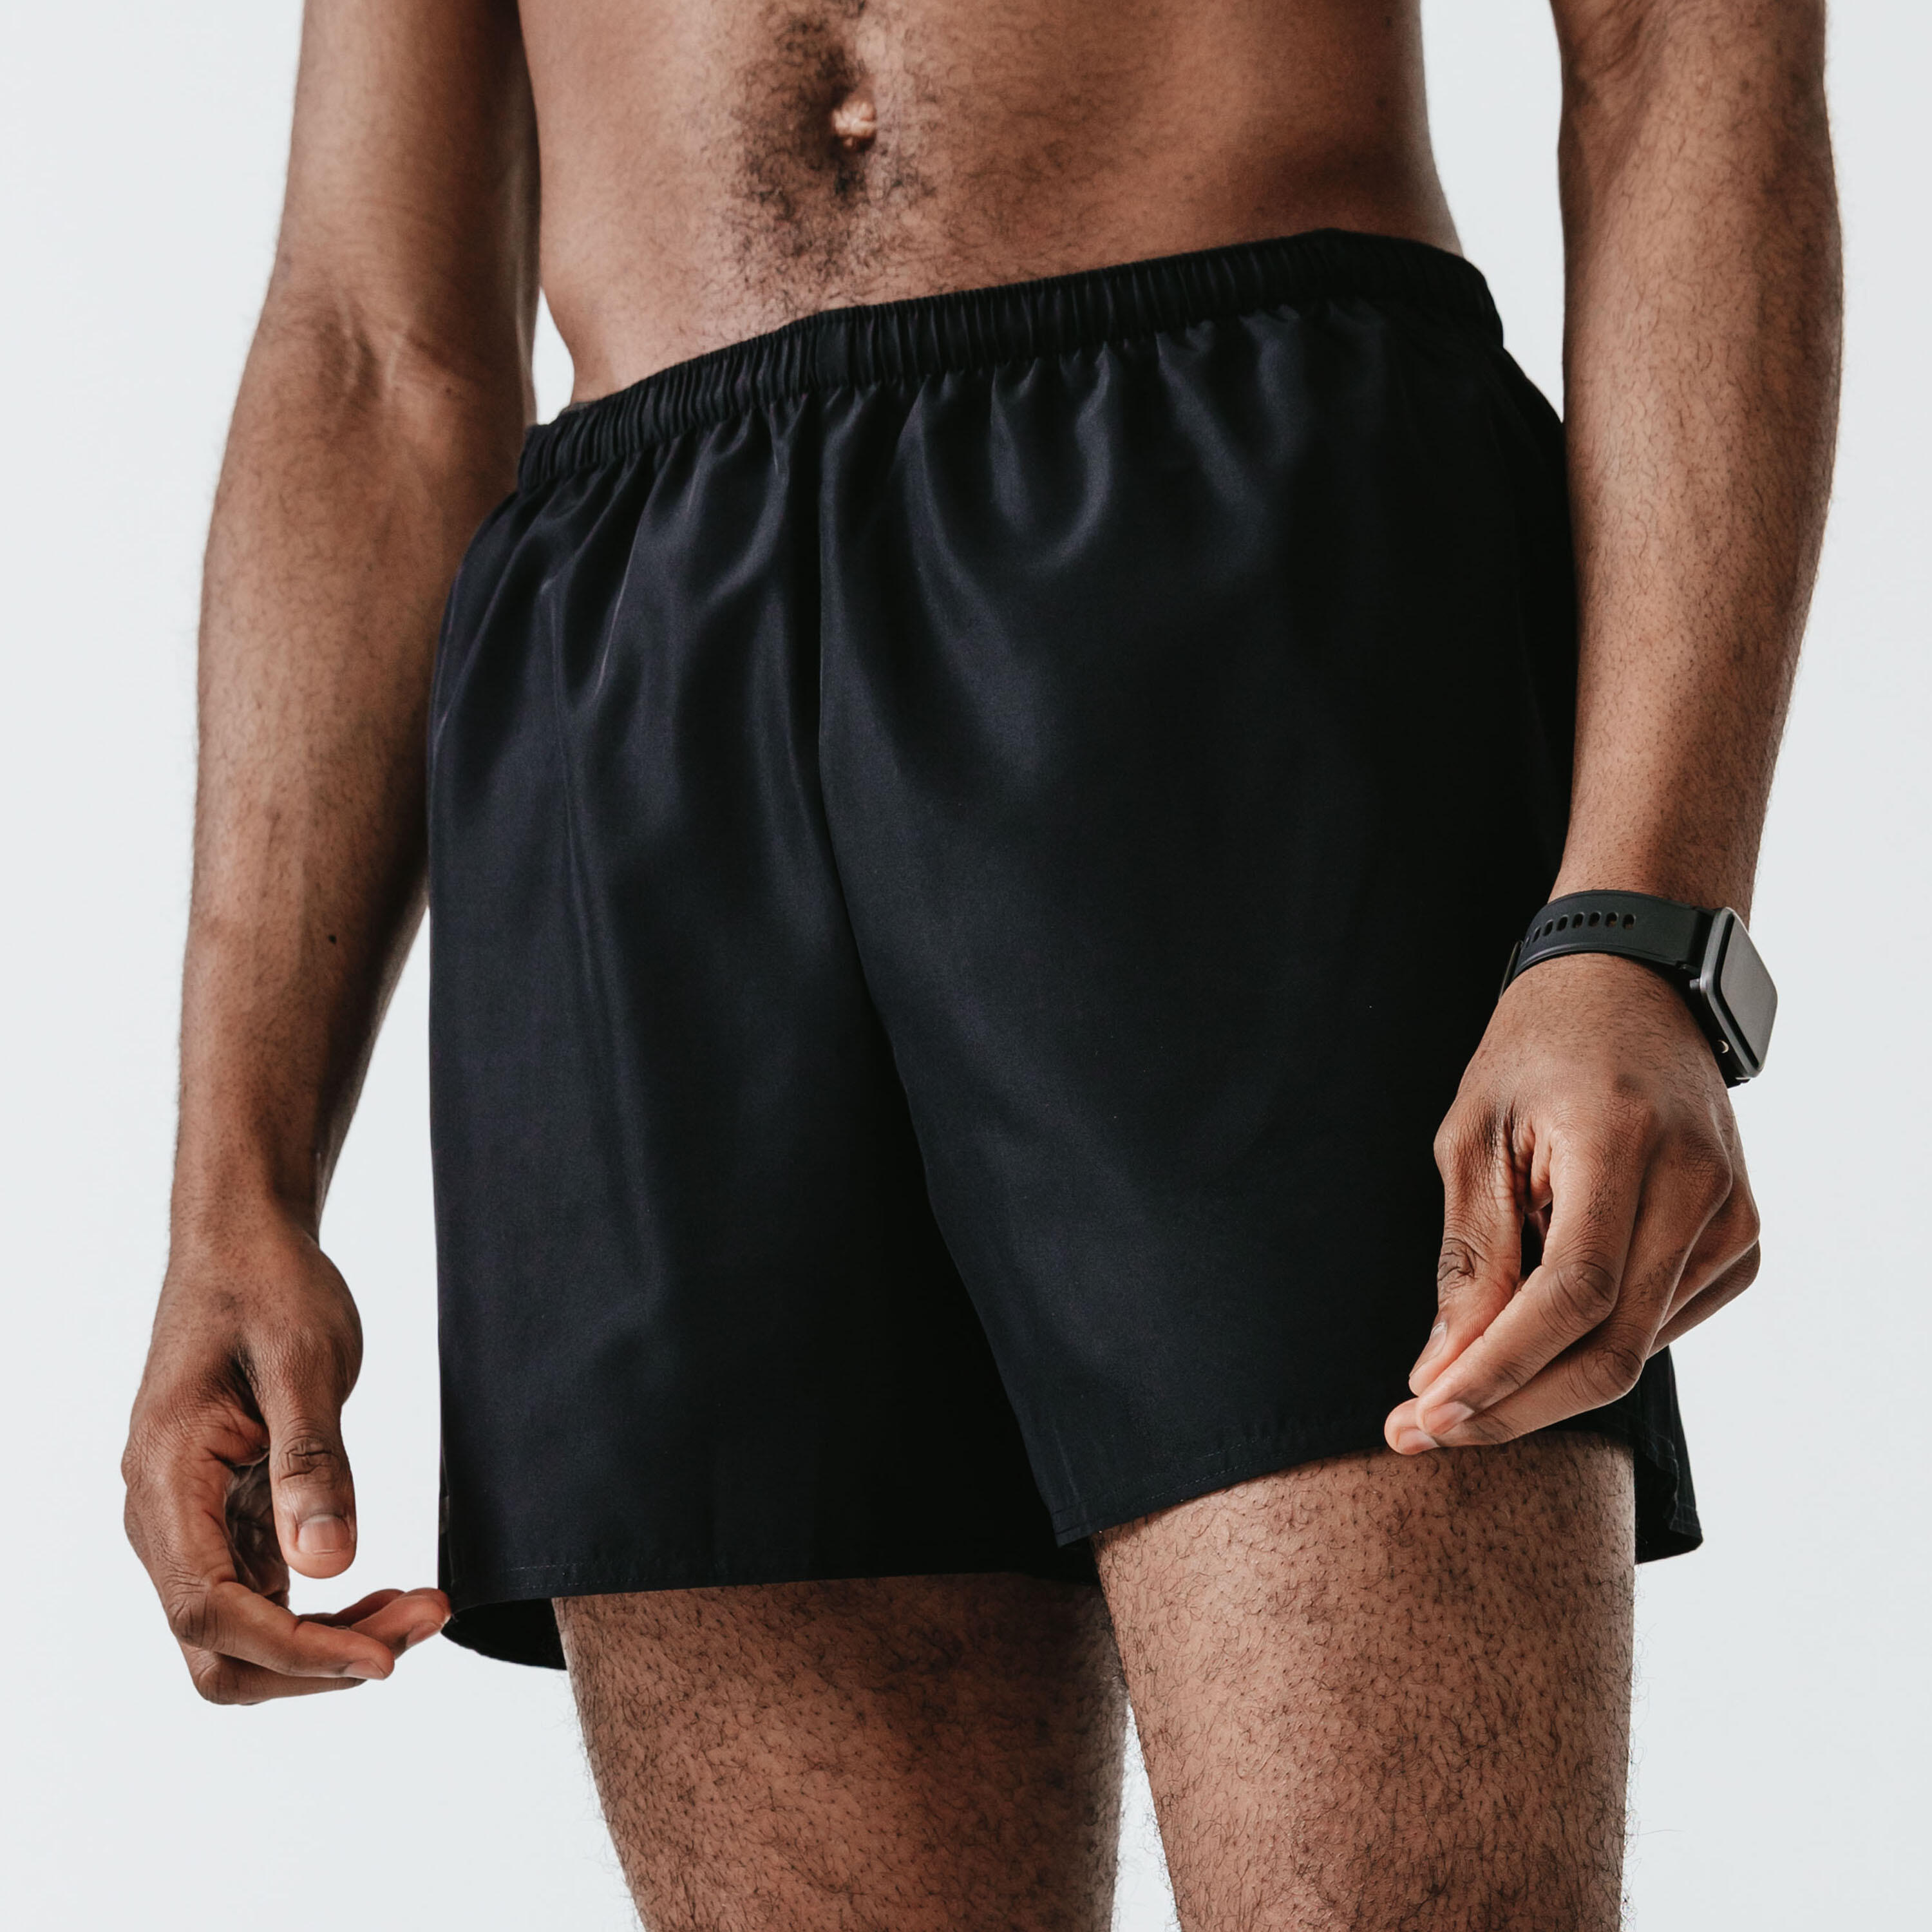 13 Best Pairs of Compression Shorts in 2023 Tested by Certified Trainers